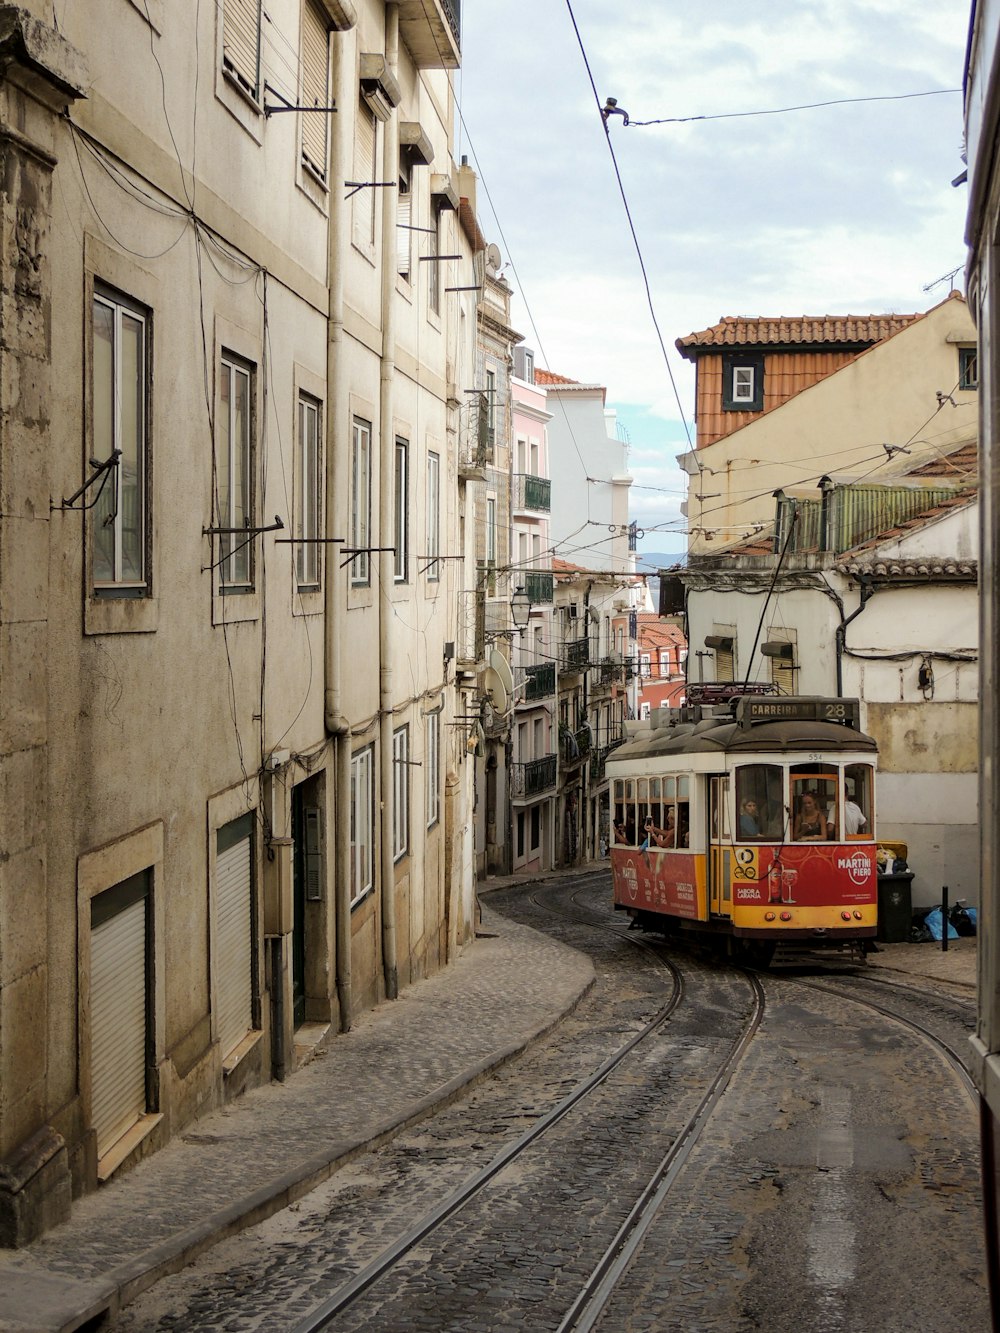 red and white tram on road between buildings during daytime